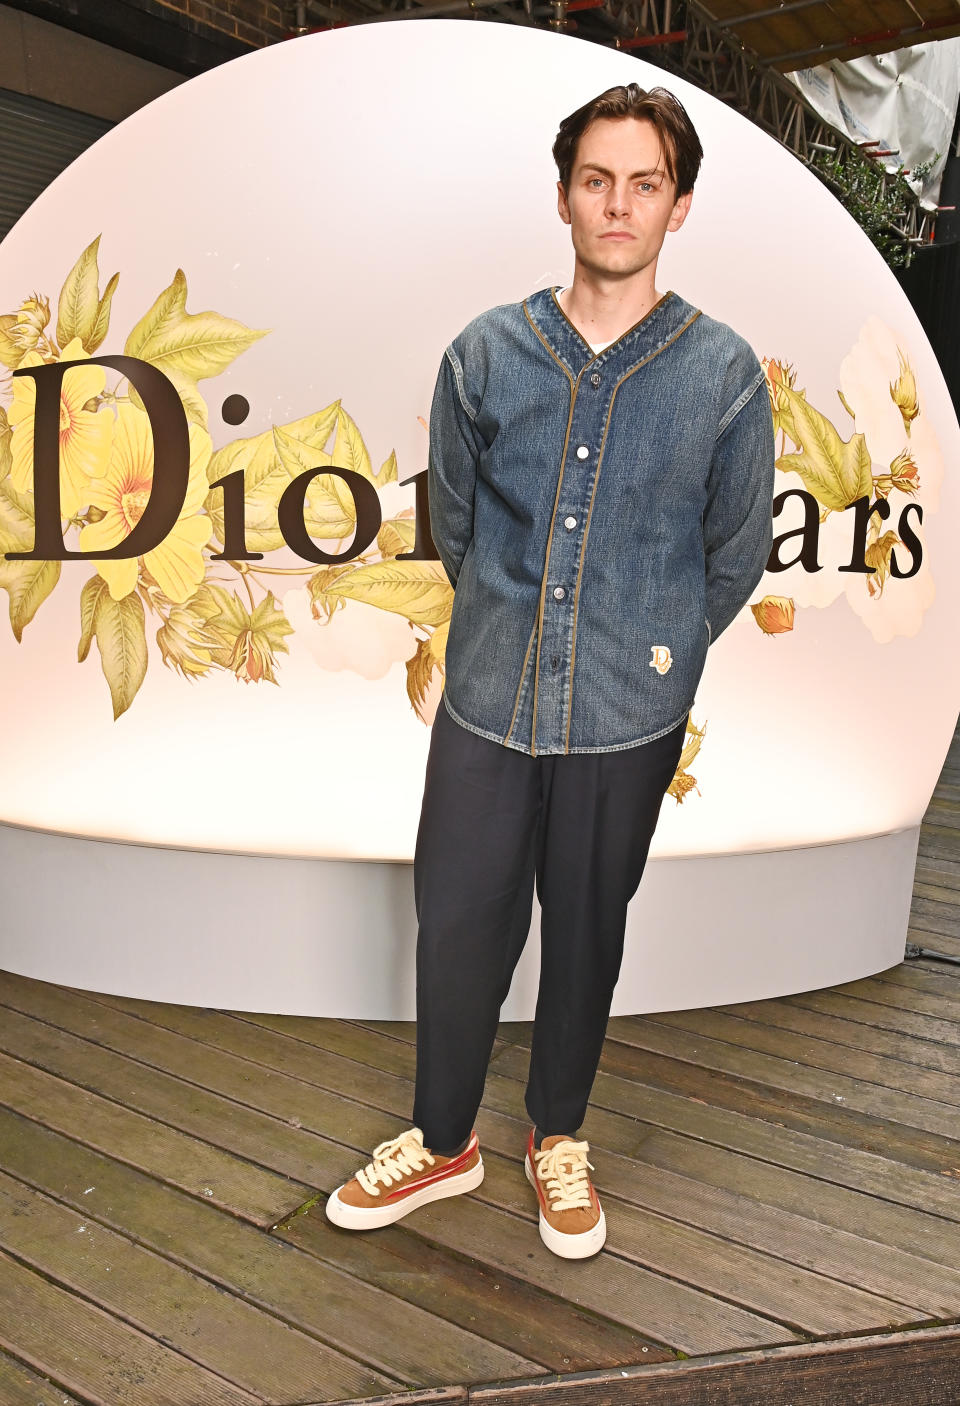 LONDON, ENGLAND - JULY 08: Freddy Carter attends the Dior Tears pop-up launch party on July 8, 2023 in London, England. 

Pic Credit: Dave Benett